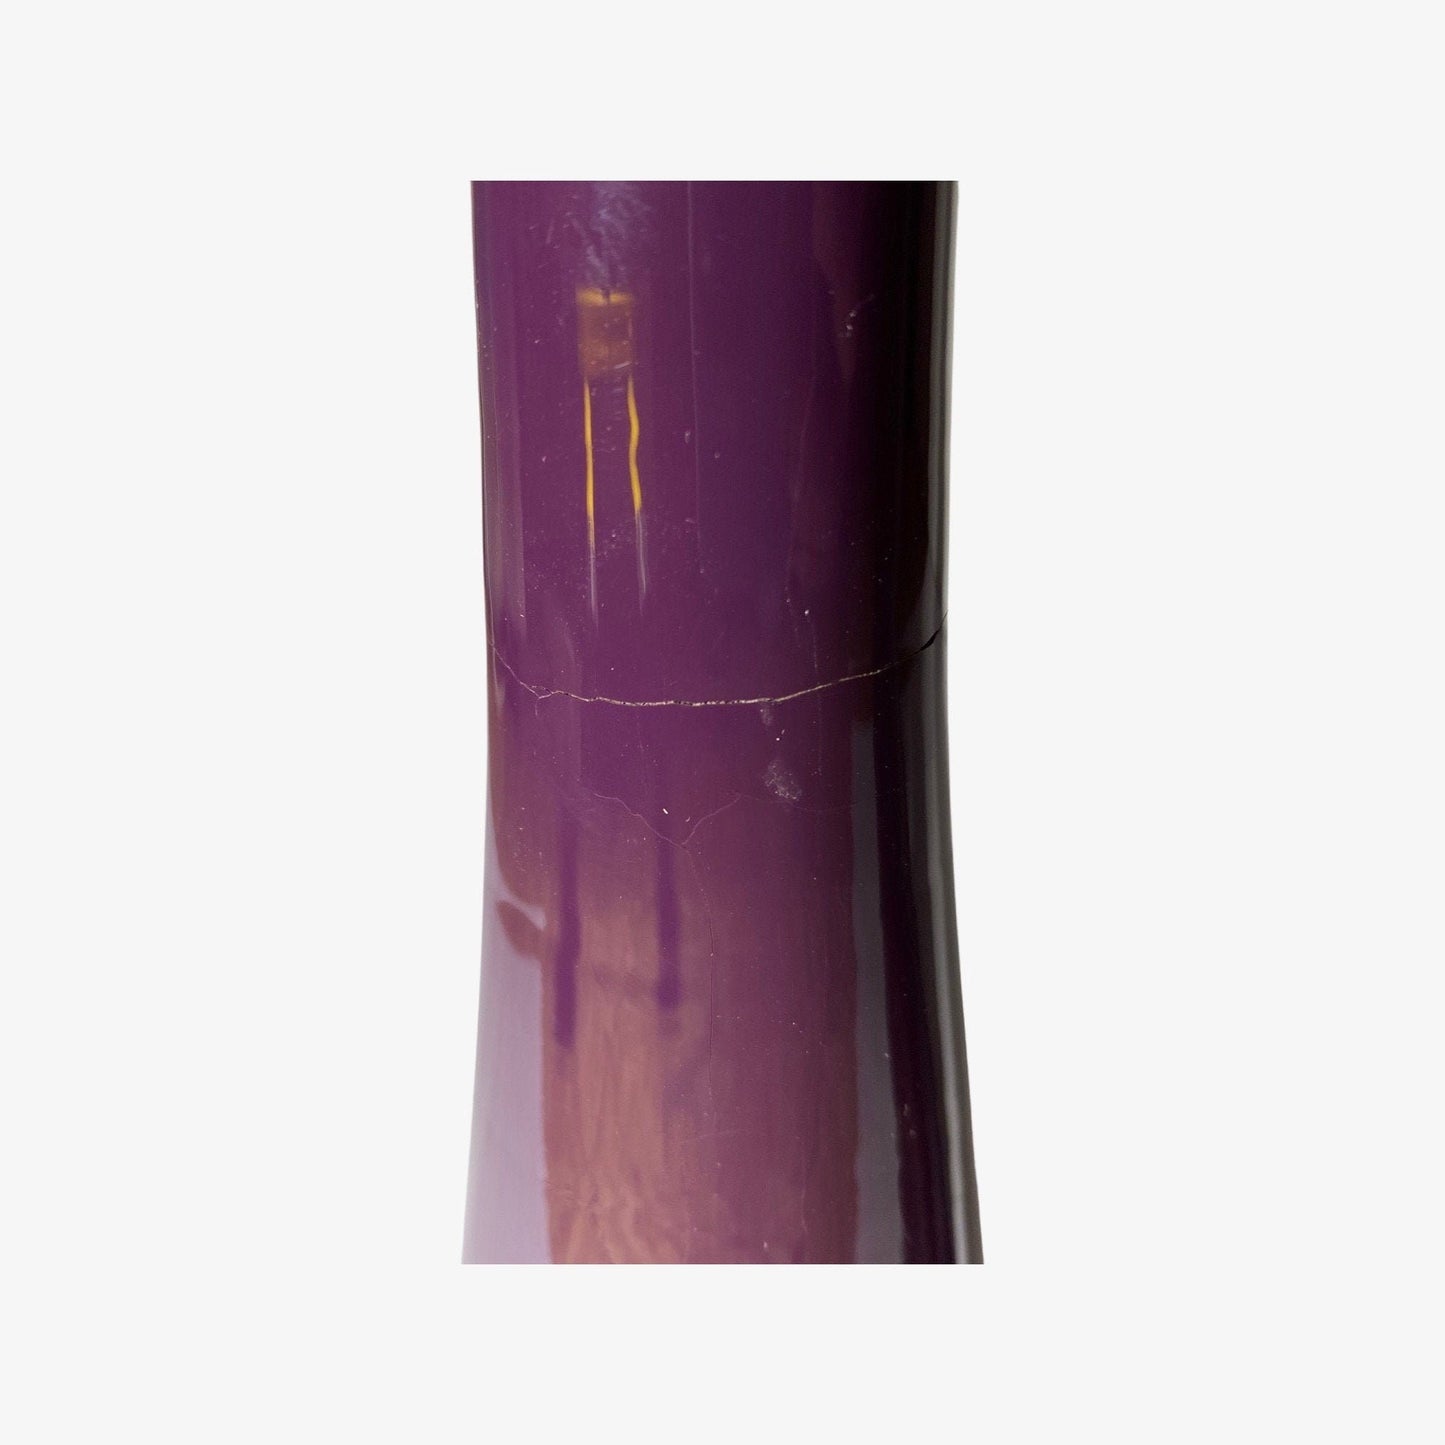 2 Purple Vintage Candlestick Holders Made From Ceramic - Mid-Century Design From Denmark | Retro Candle Holder | Height 13.8'' / 35cm